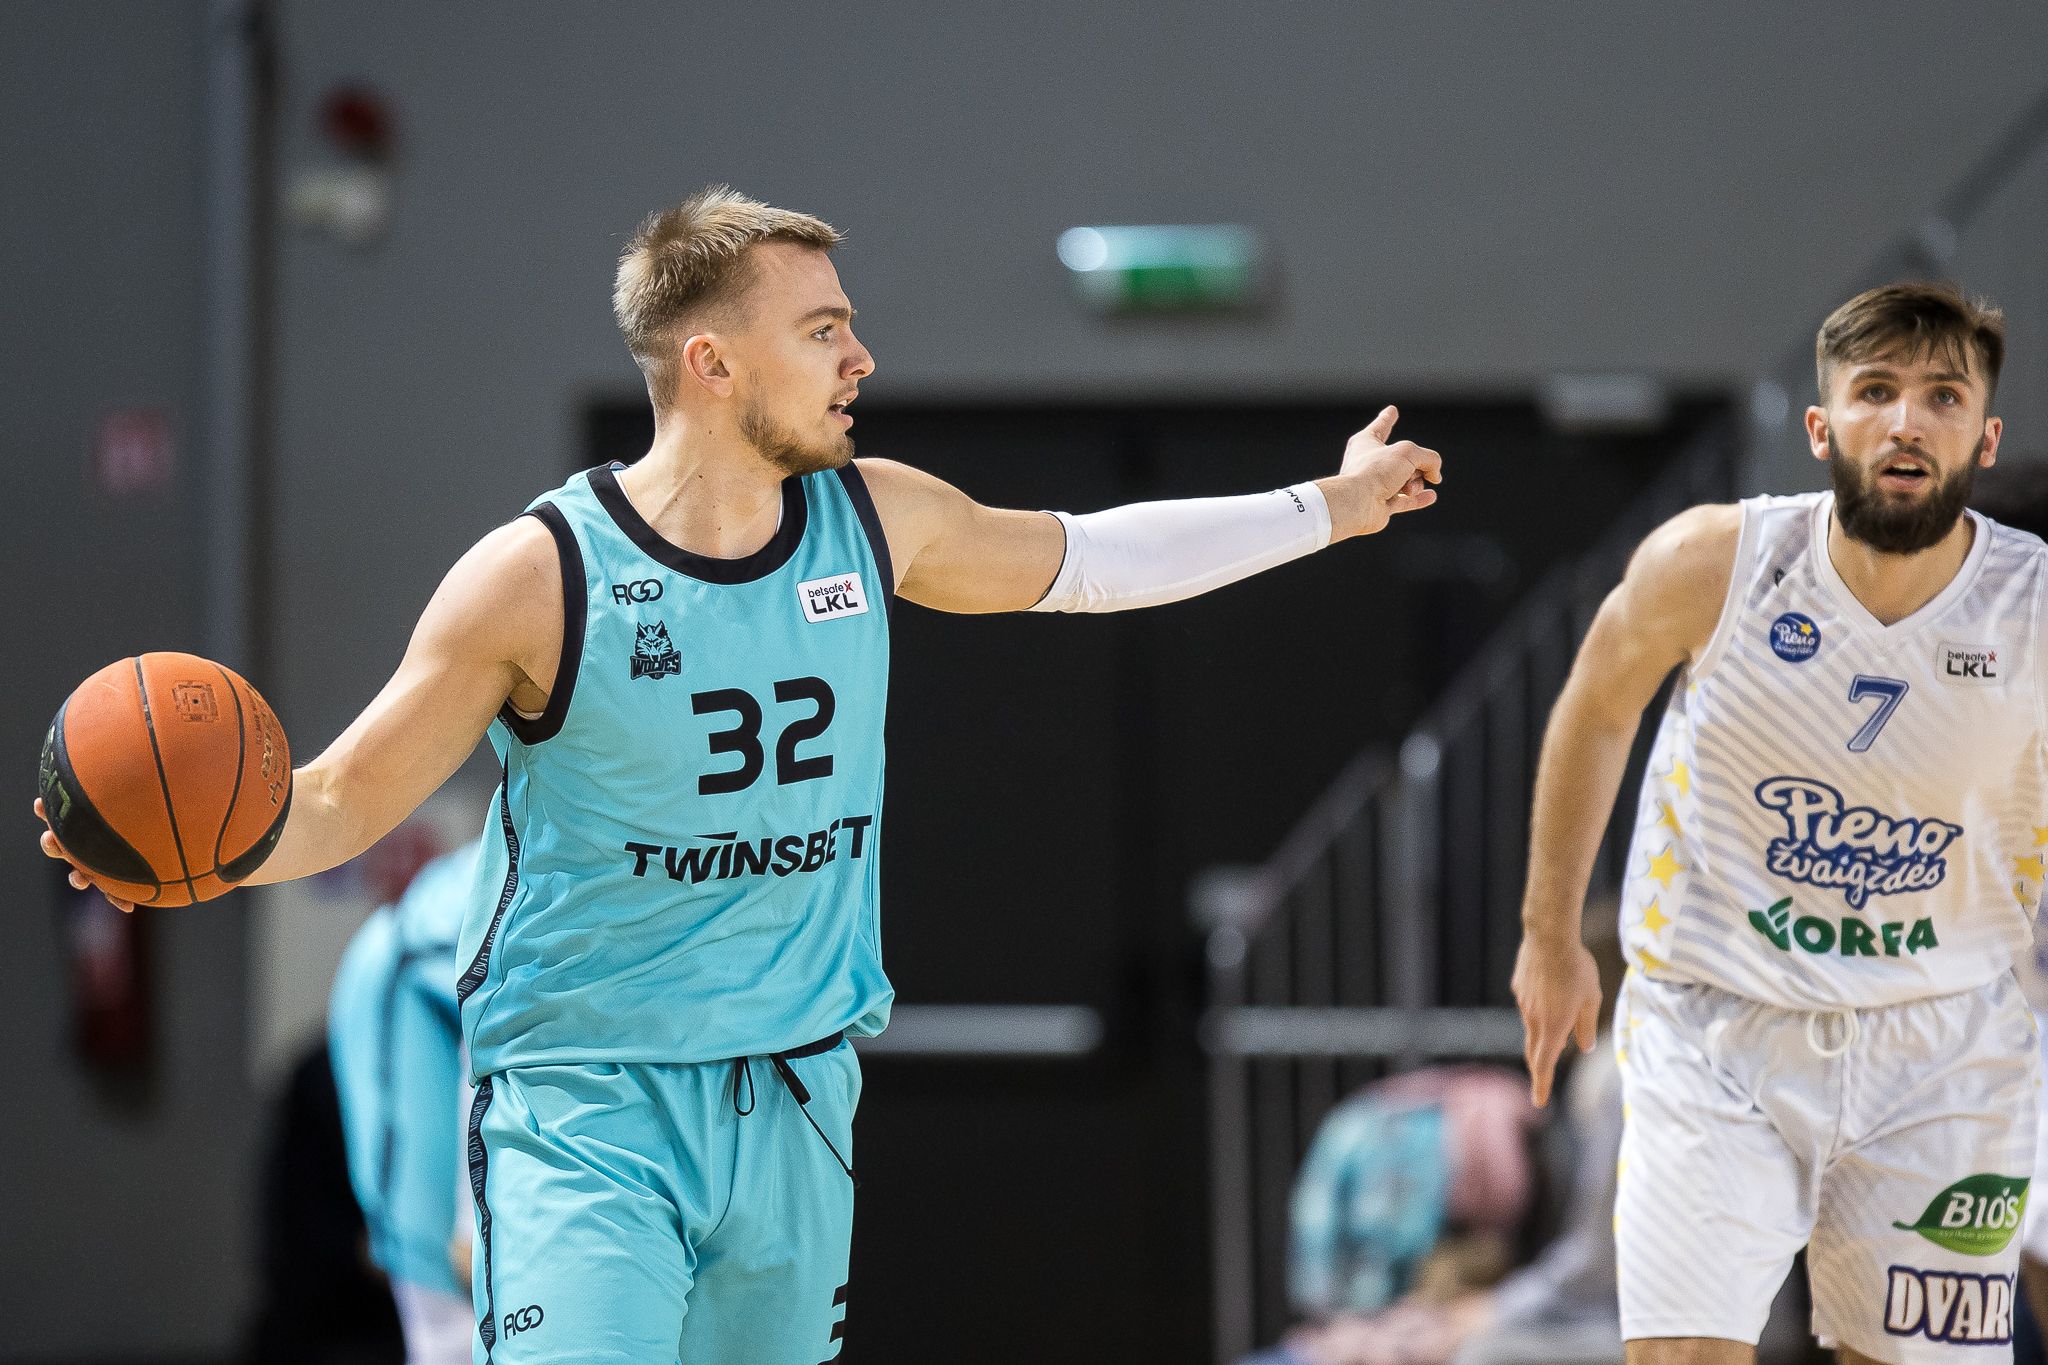 Žagars returns, Wolves Twinsbet rack up 4th straight win in the league